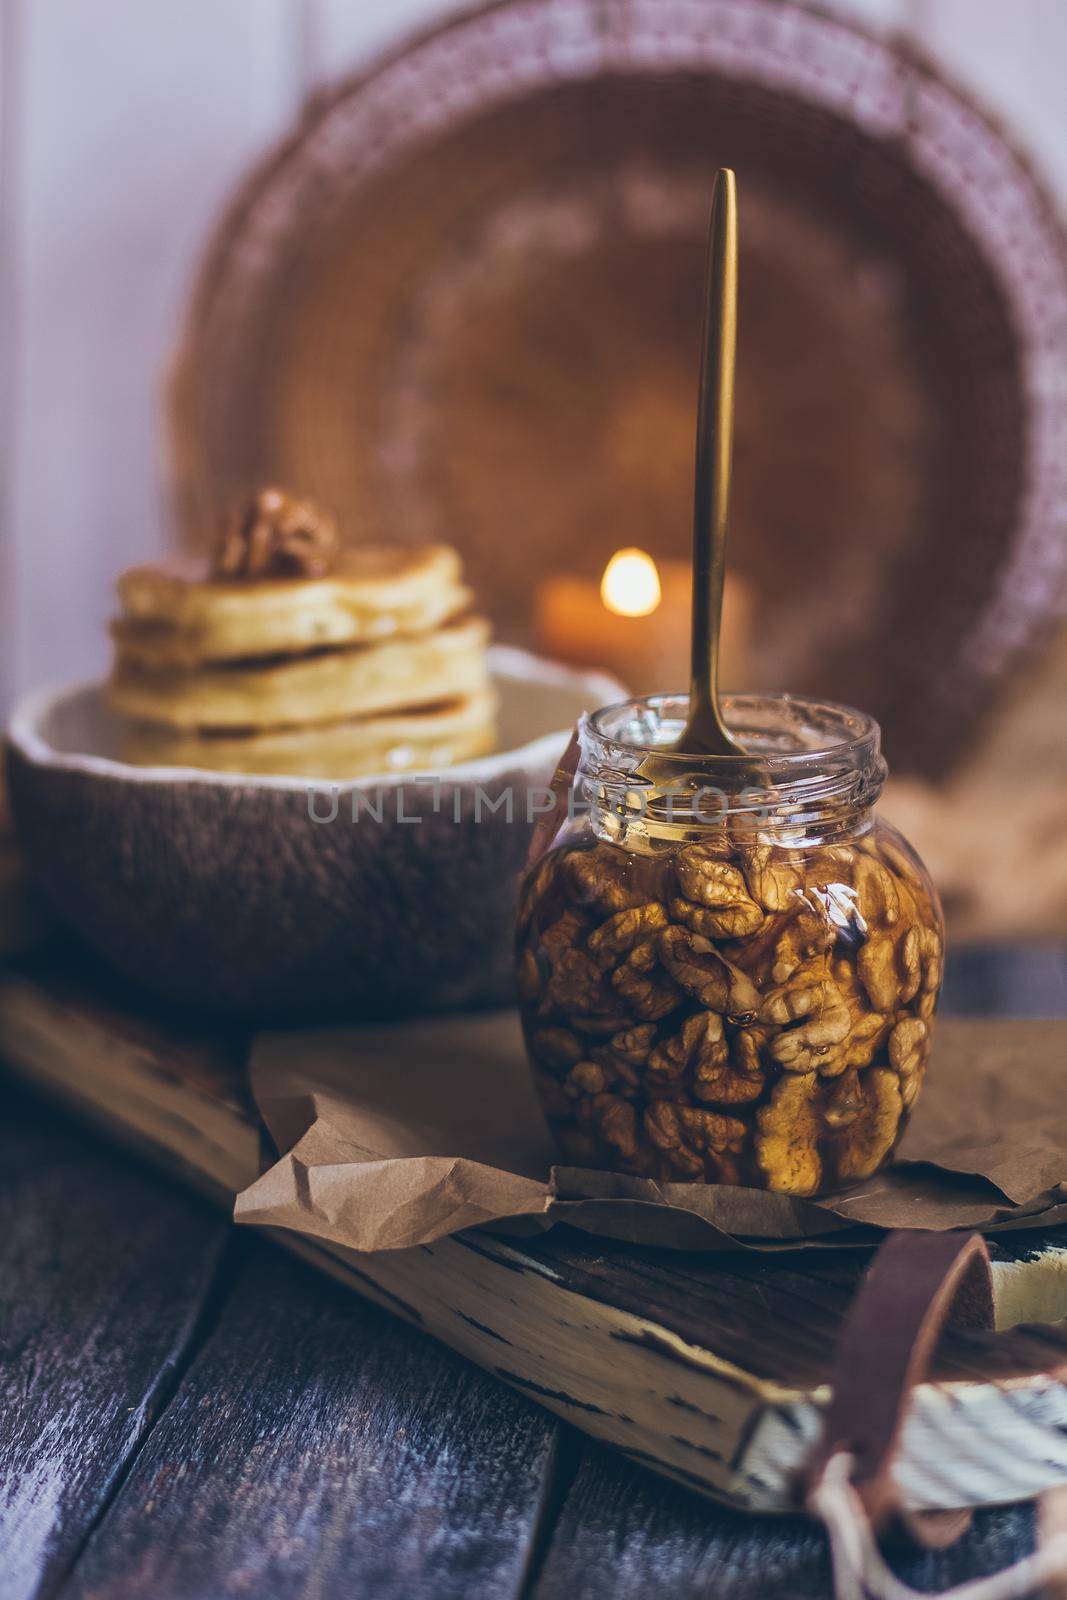 A glass jar of honey with nuts on wooden background.